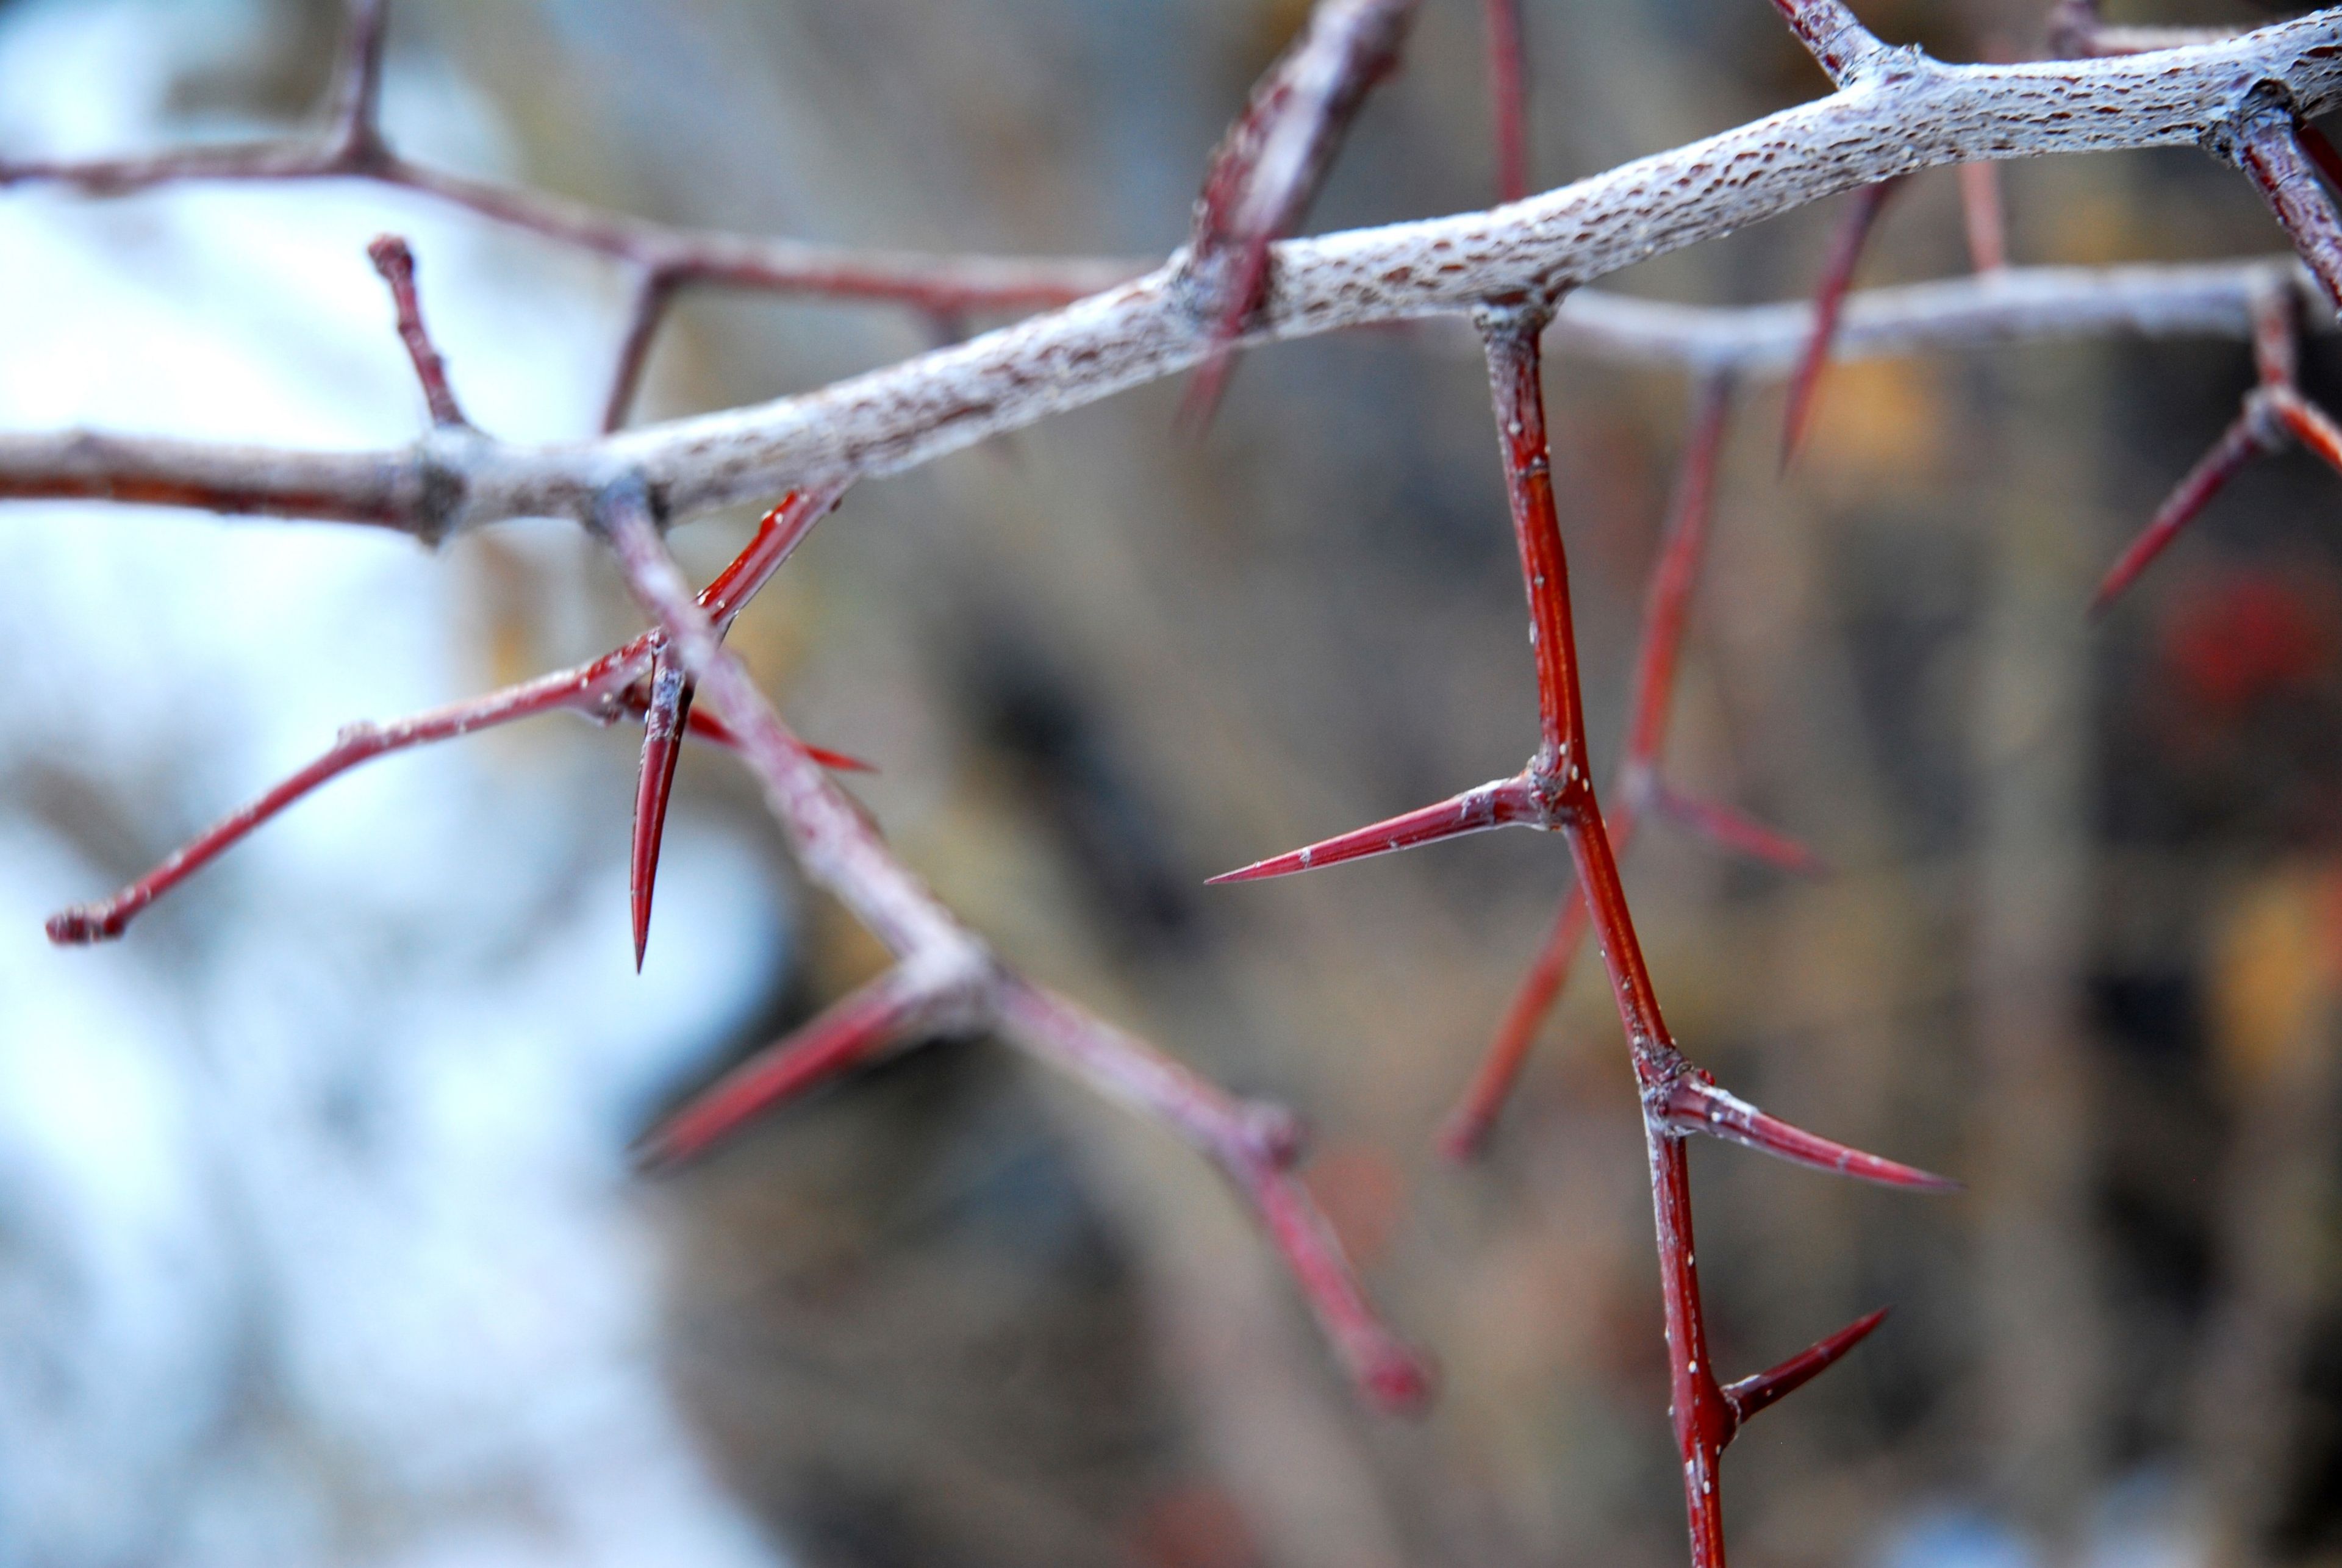 Thorns on branches in the winter.